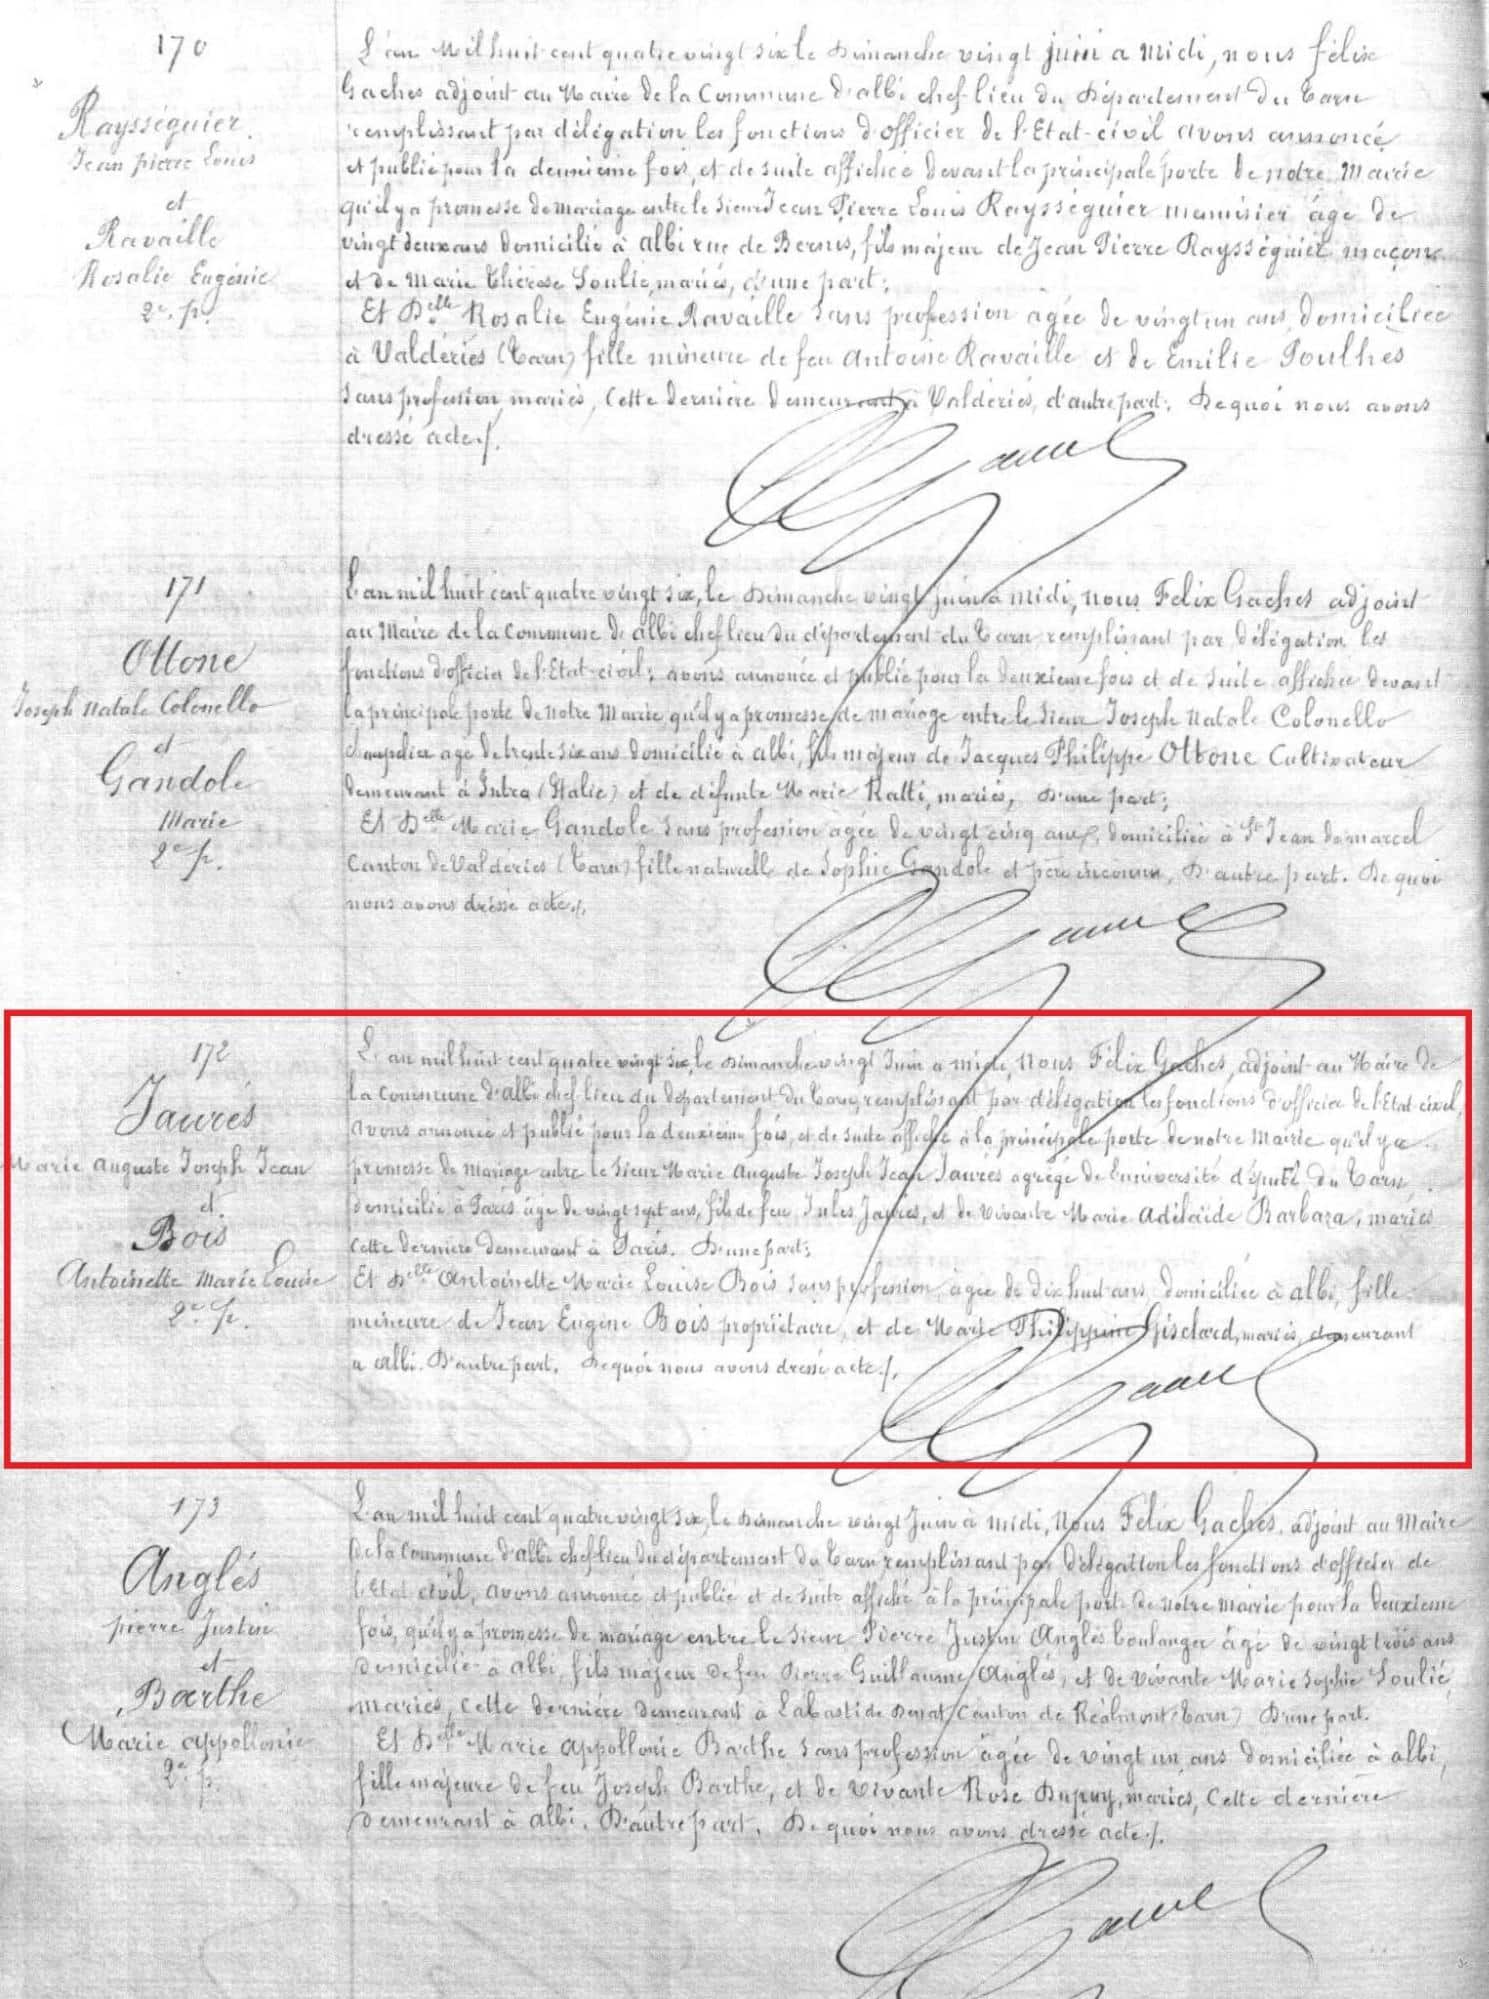 Marriage record of Jean Jaurès and Antoinette Marie Louise Bois [Credit: MyHeritage France, Church Marriages and Civil Marriages]